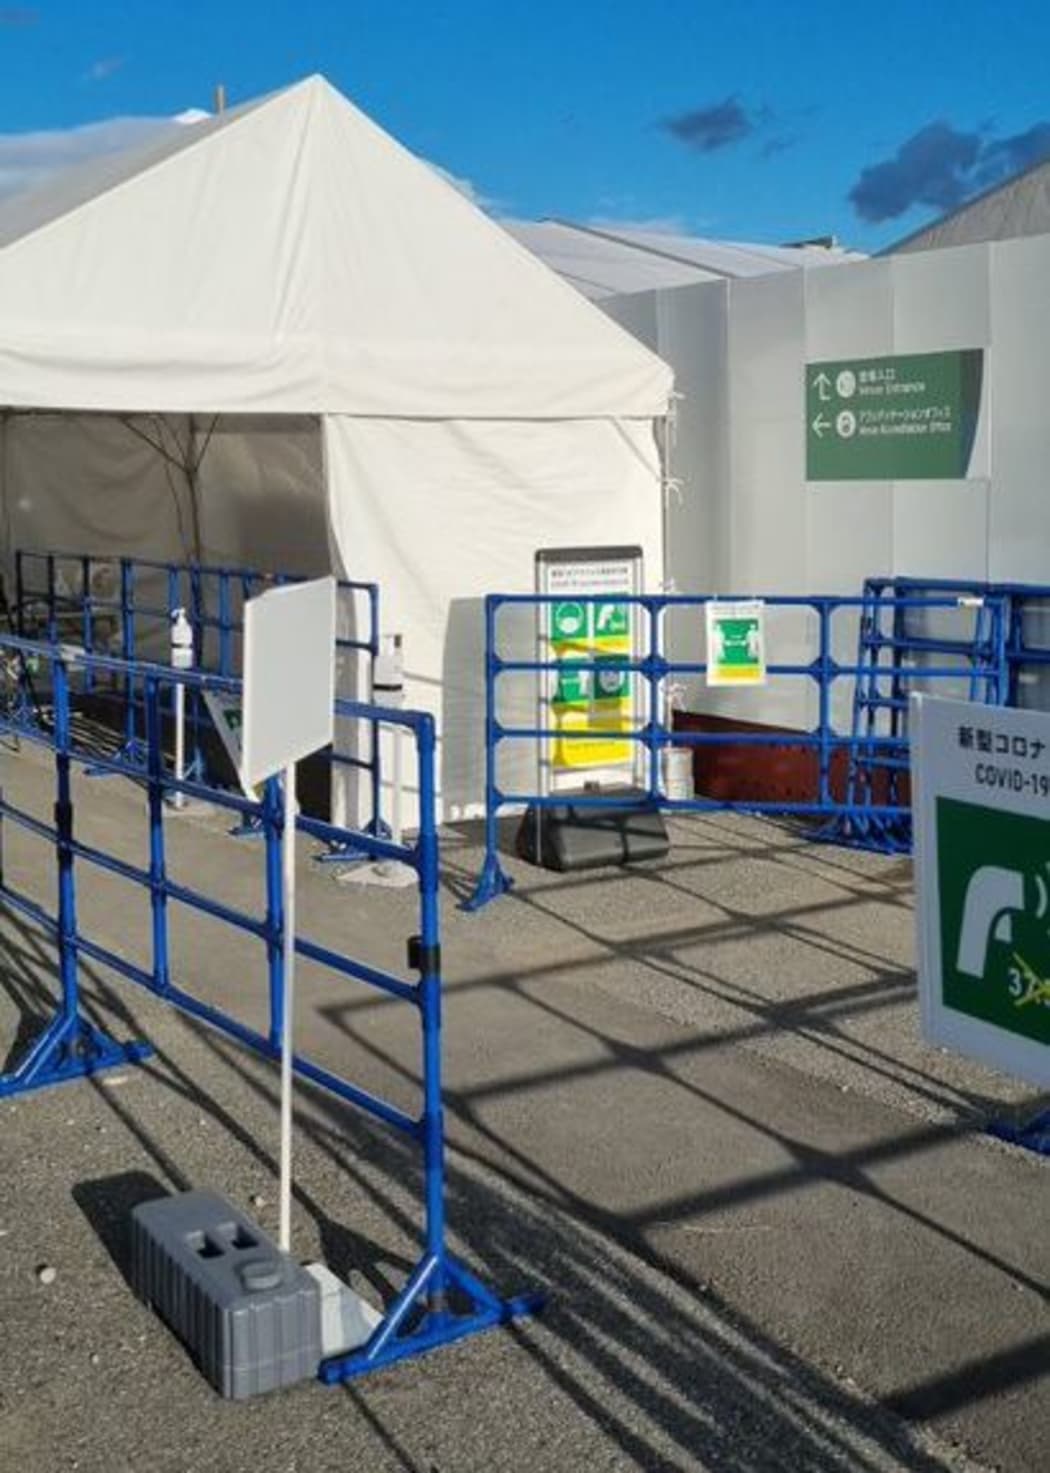 The checkpoint into the Olympic venue.